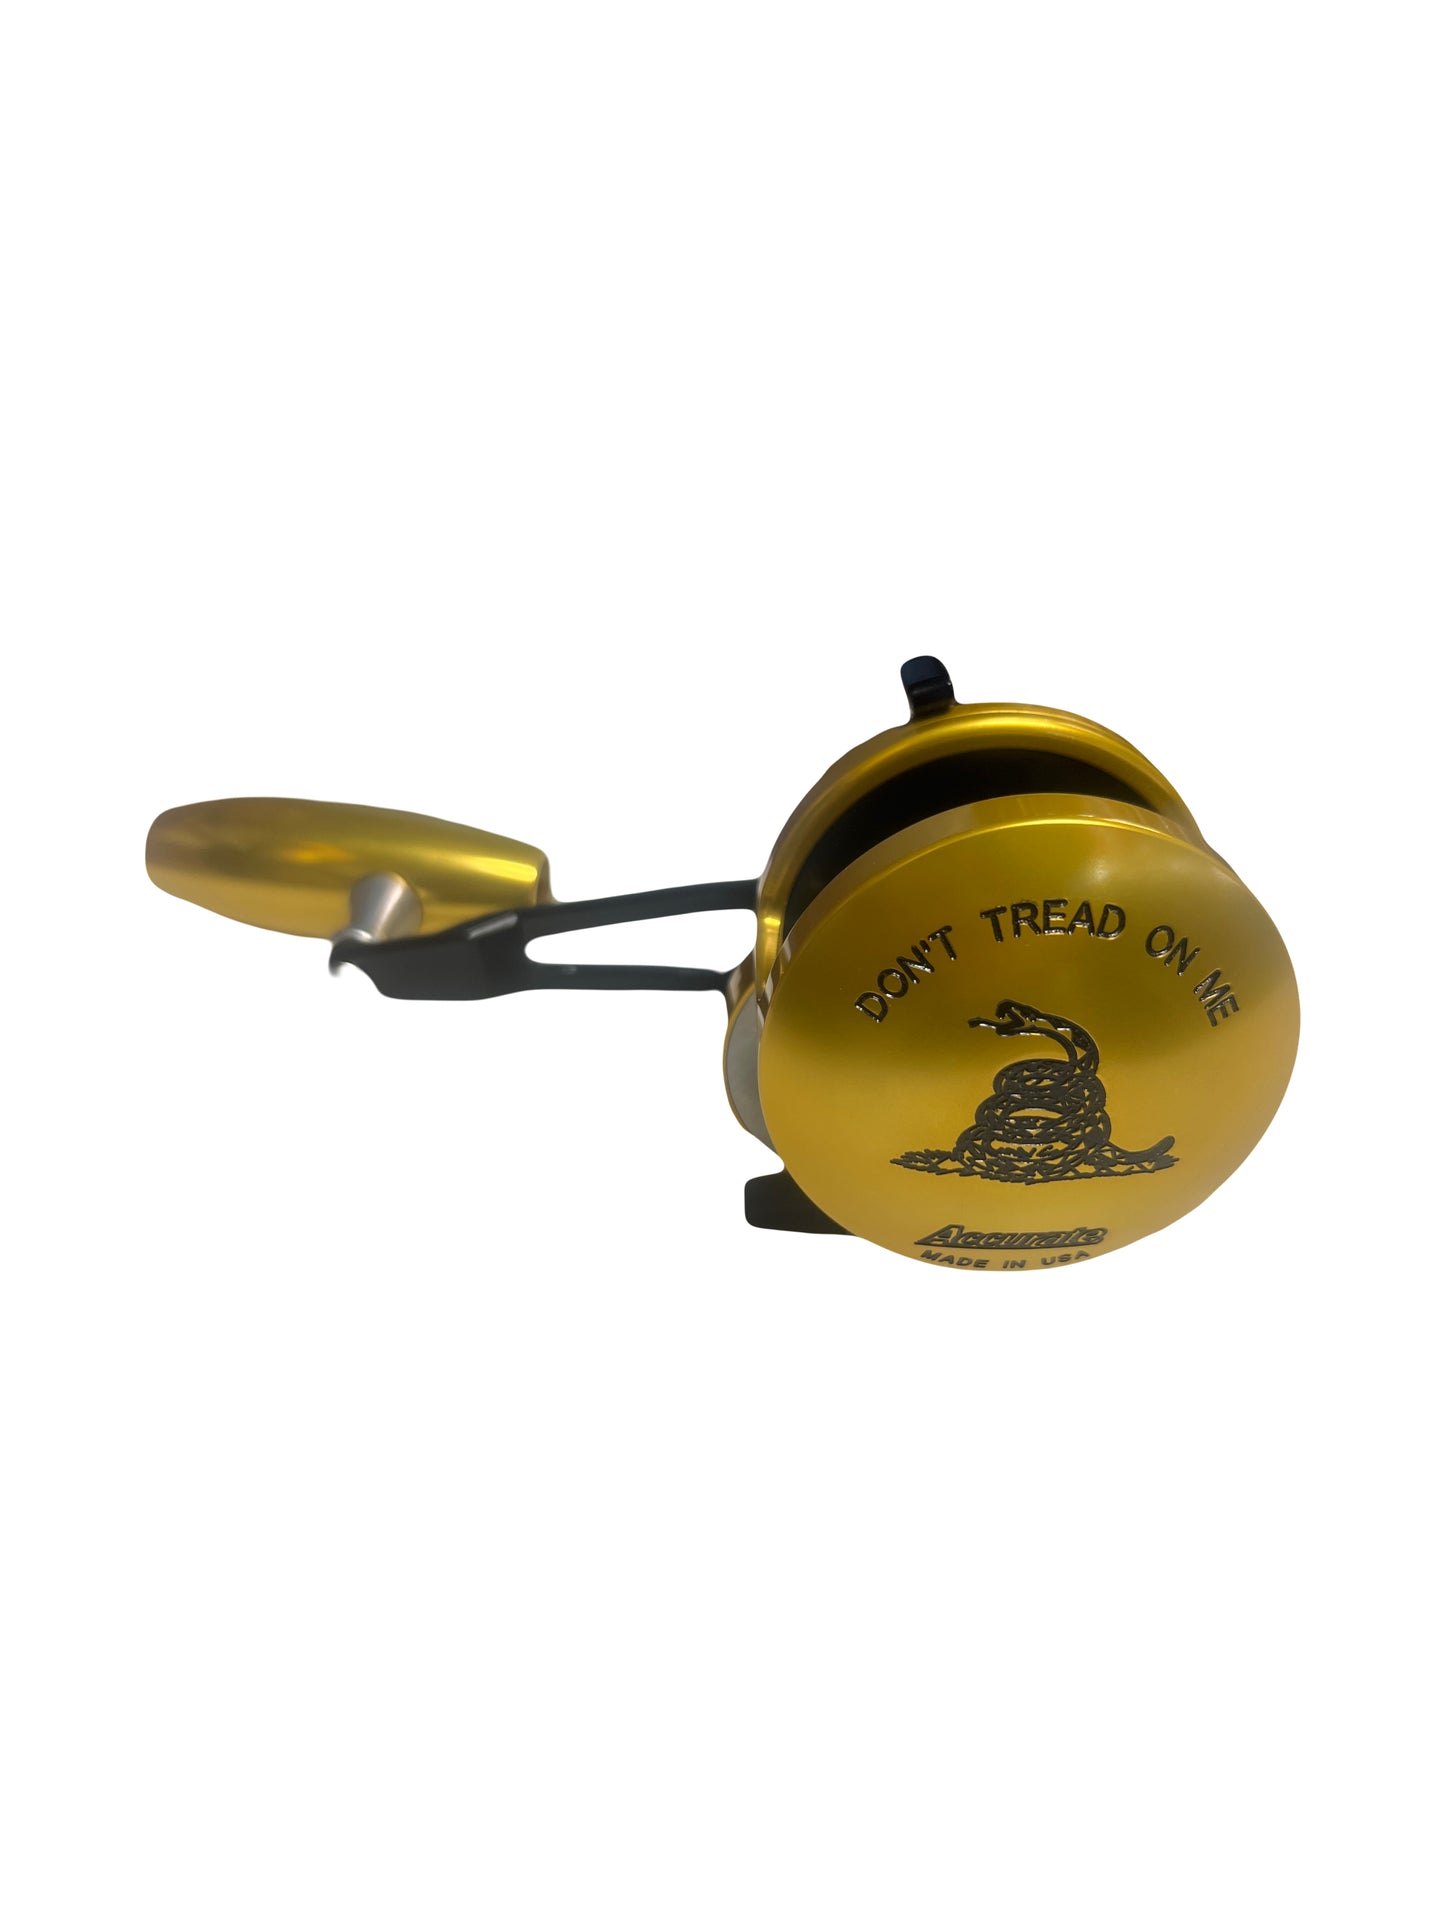 Accurate Valiant 2-Speed Fishing Reel Don't Tread On Me BV2-50ON-SPJ